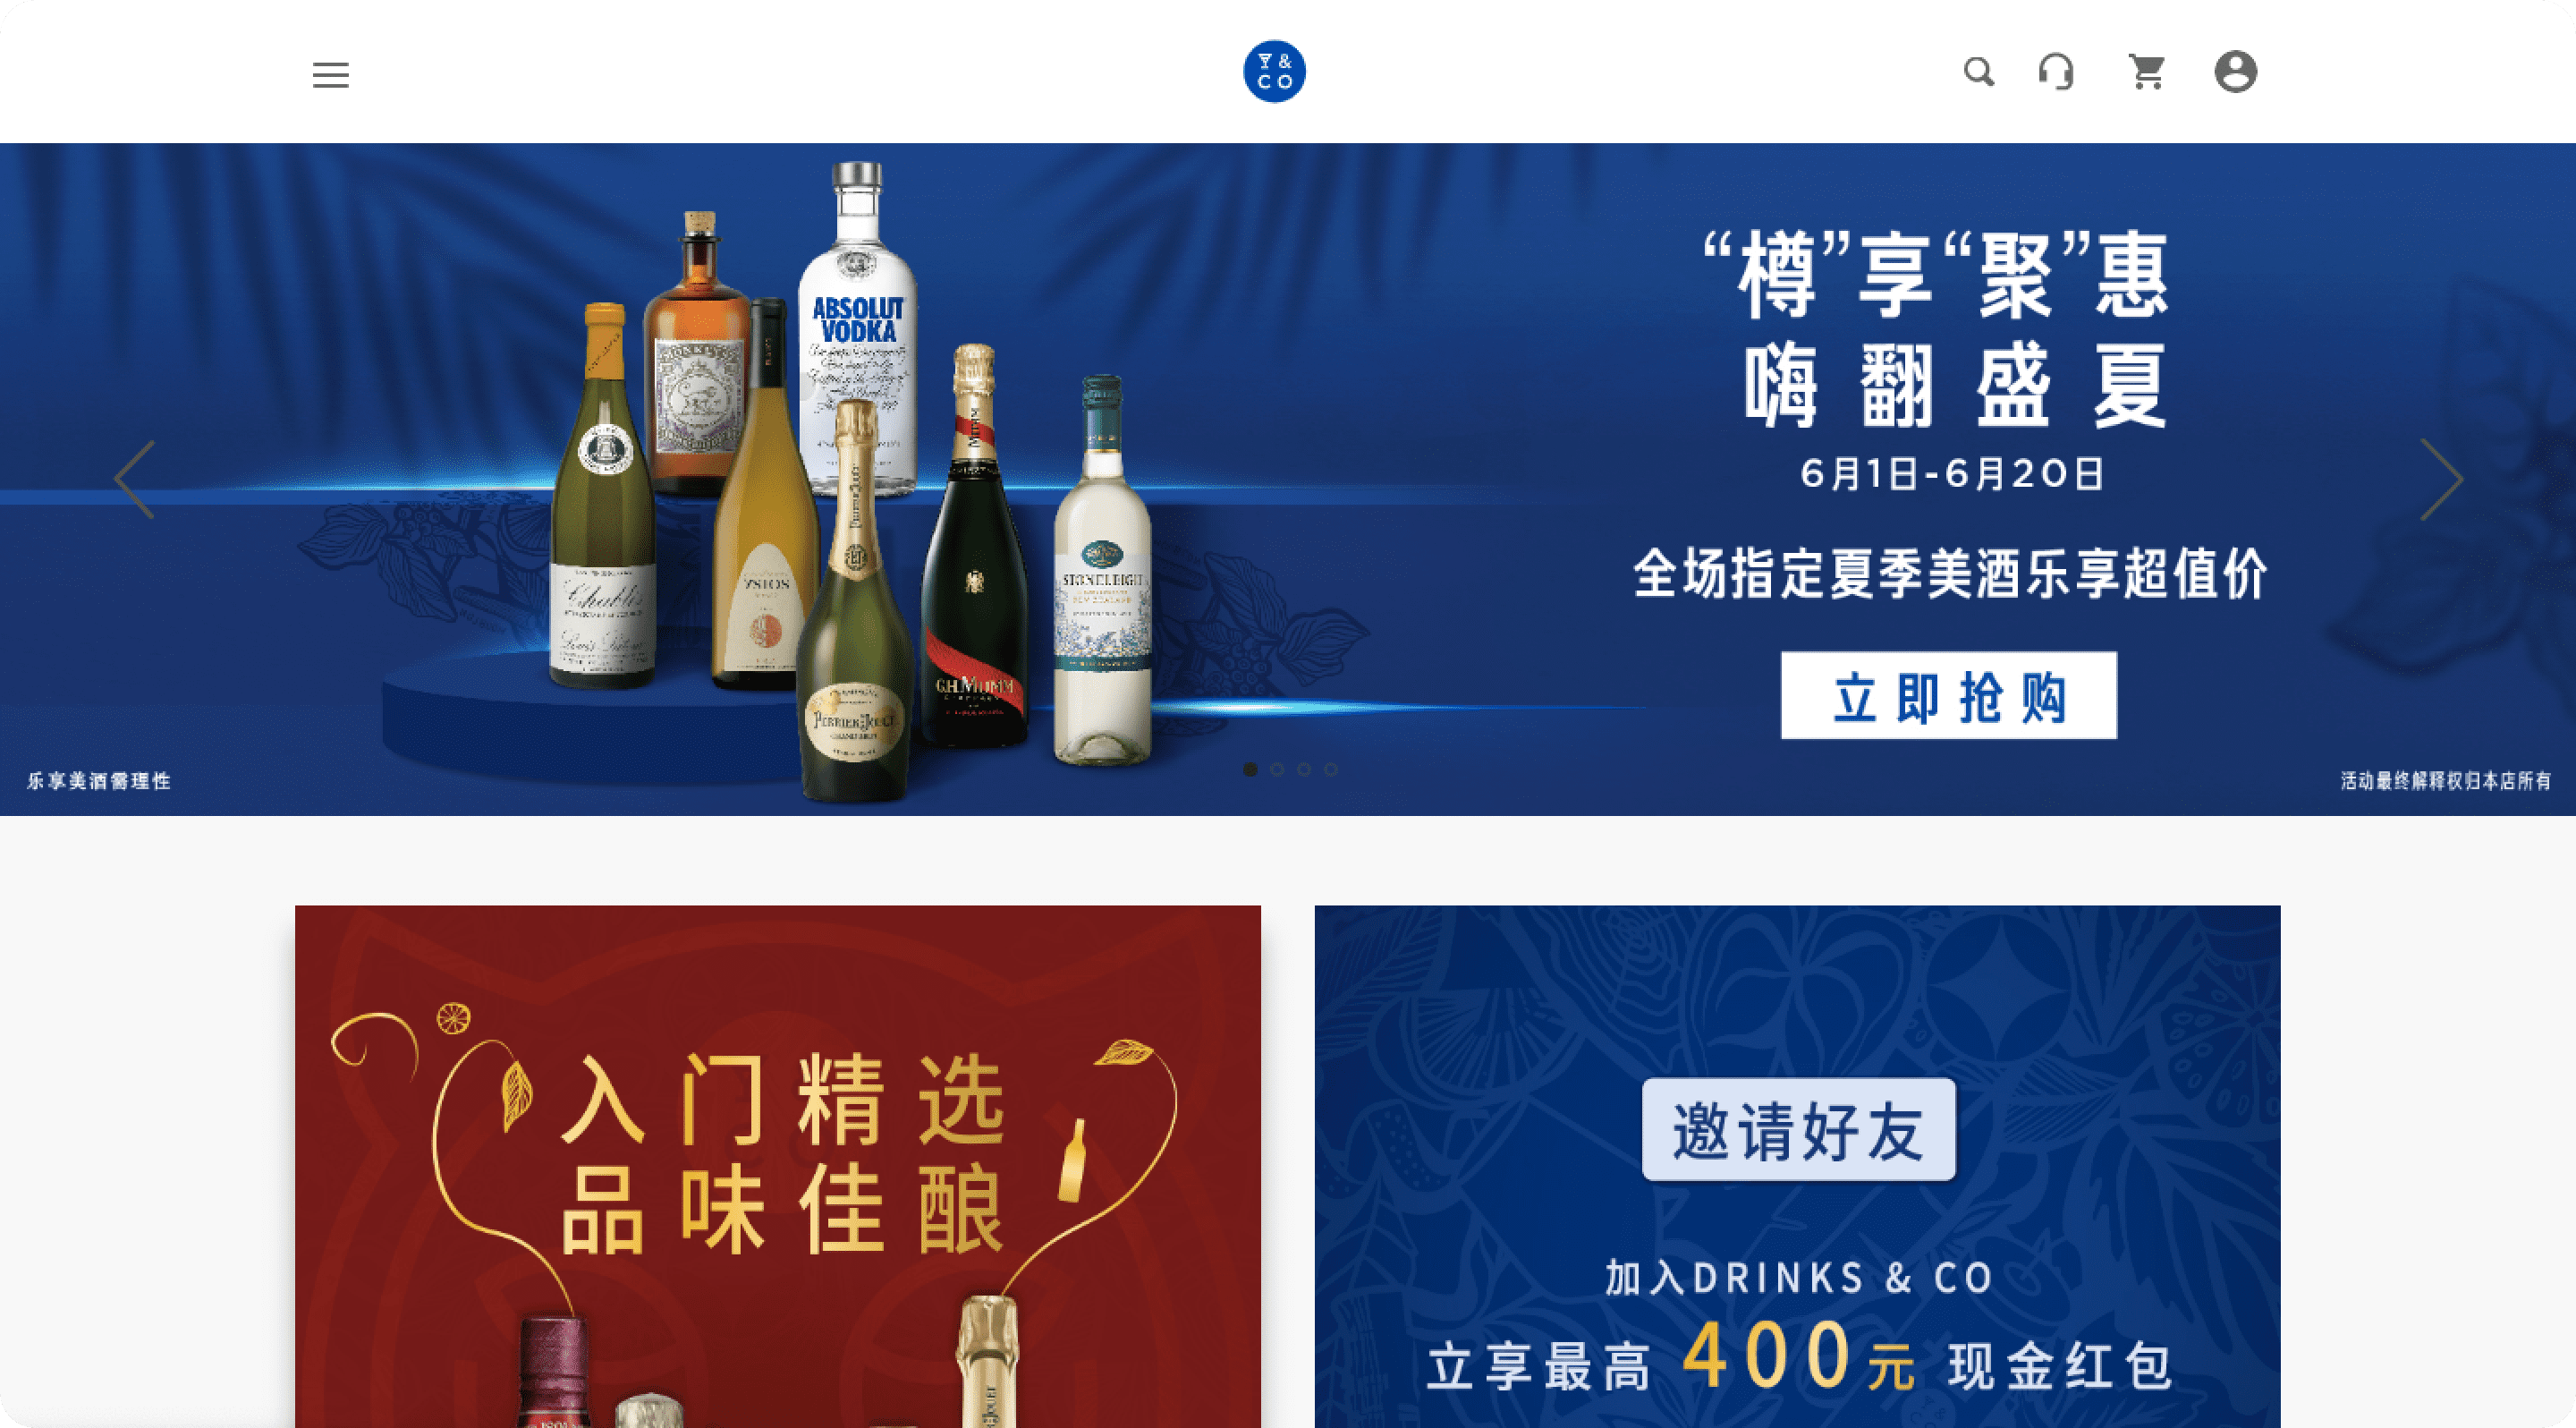 Pernod Ricard has since updated its Drinks&Co website to match new changes